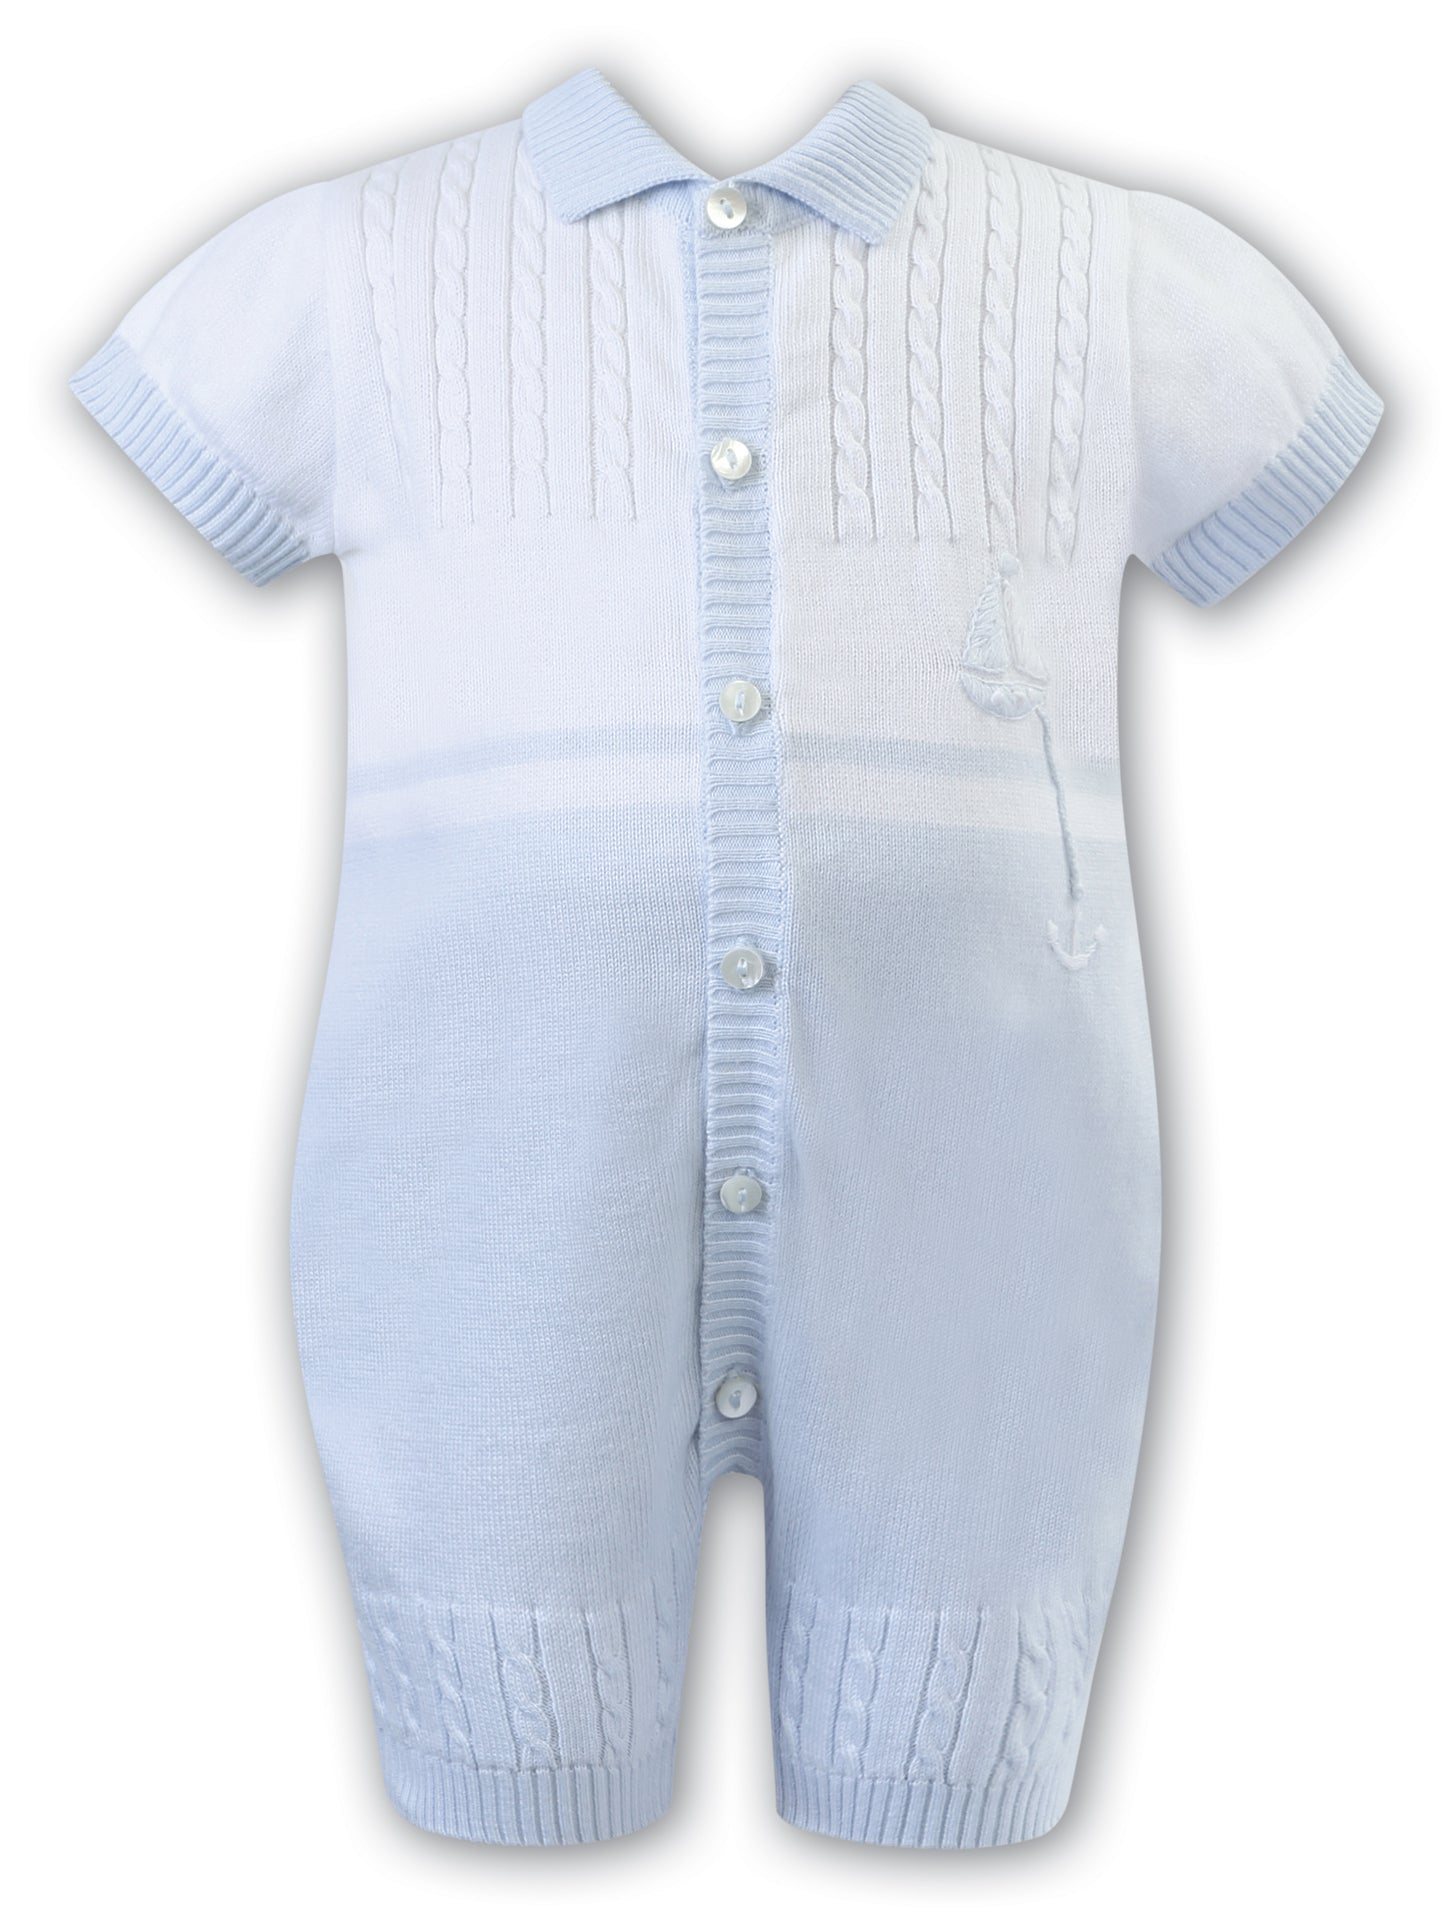 Sarah Louise Baby Boy's Pale Blue & White Knitted Short Romper